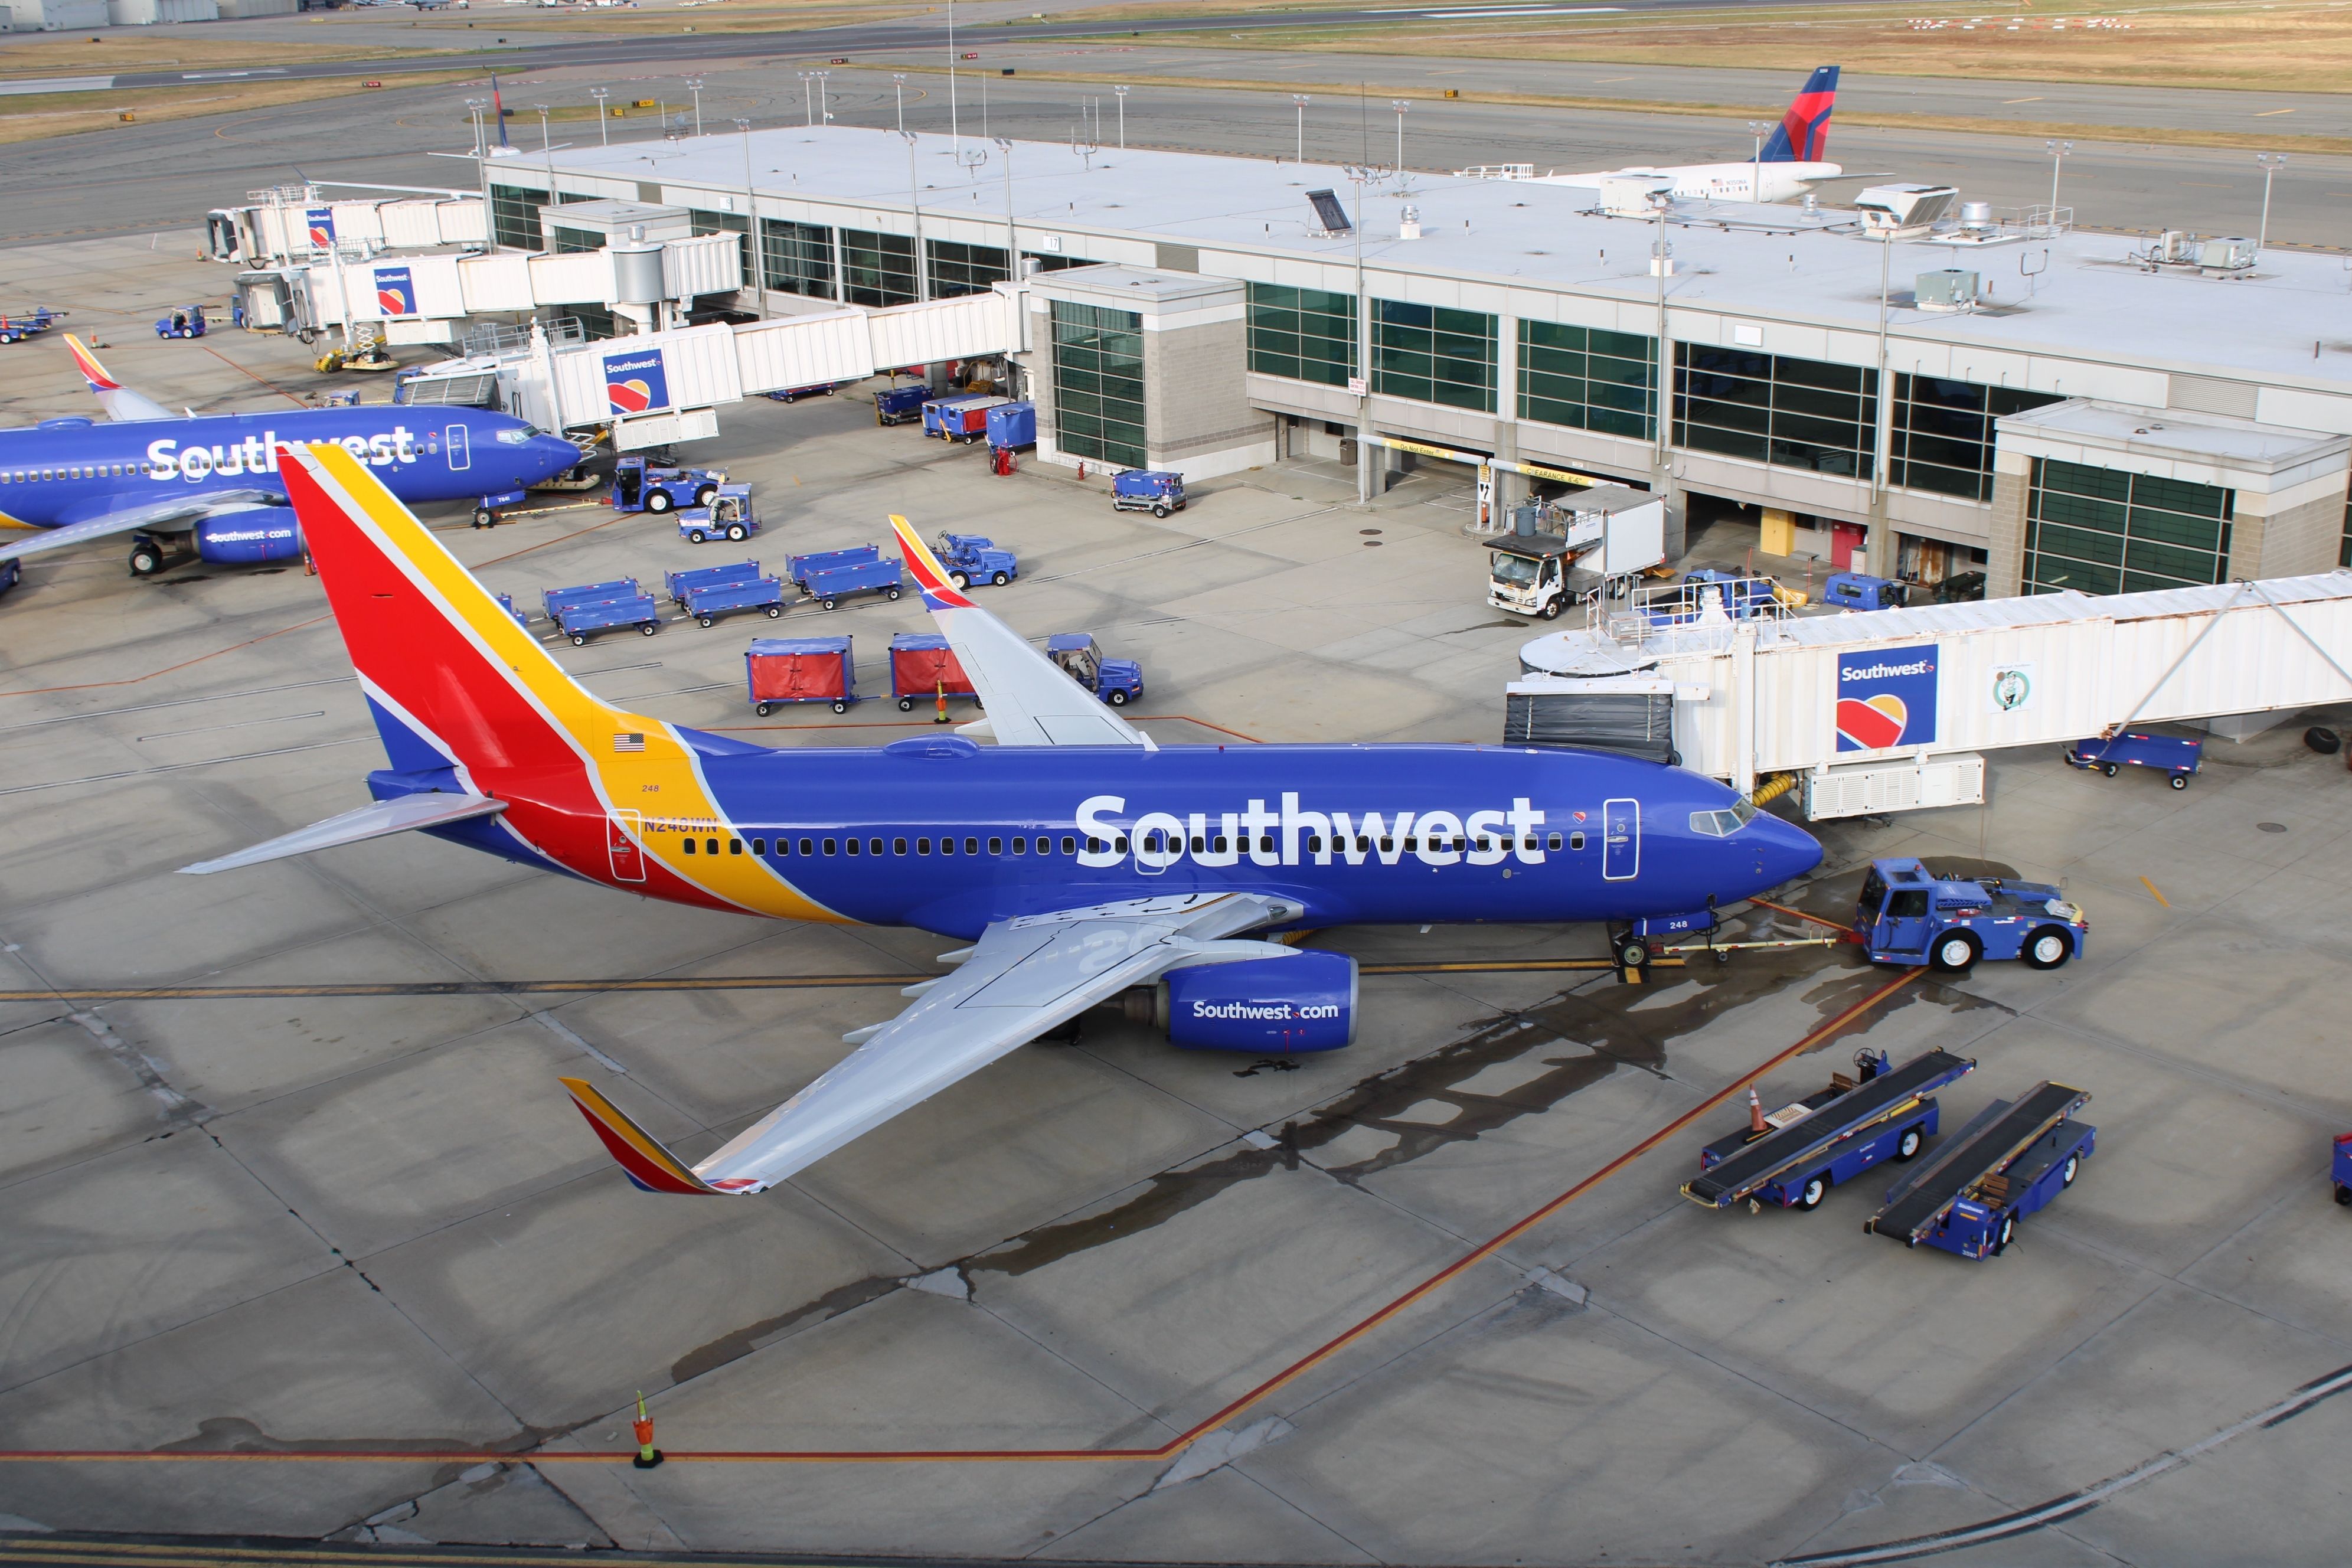 Southwest Airlines Boeing 737-700 at an airport shutterstock_2187223977